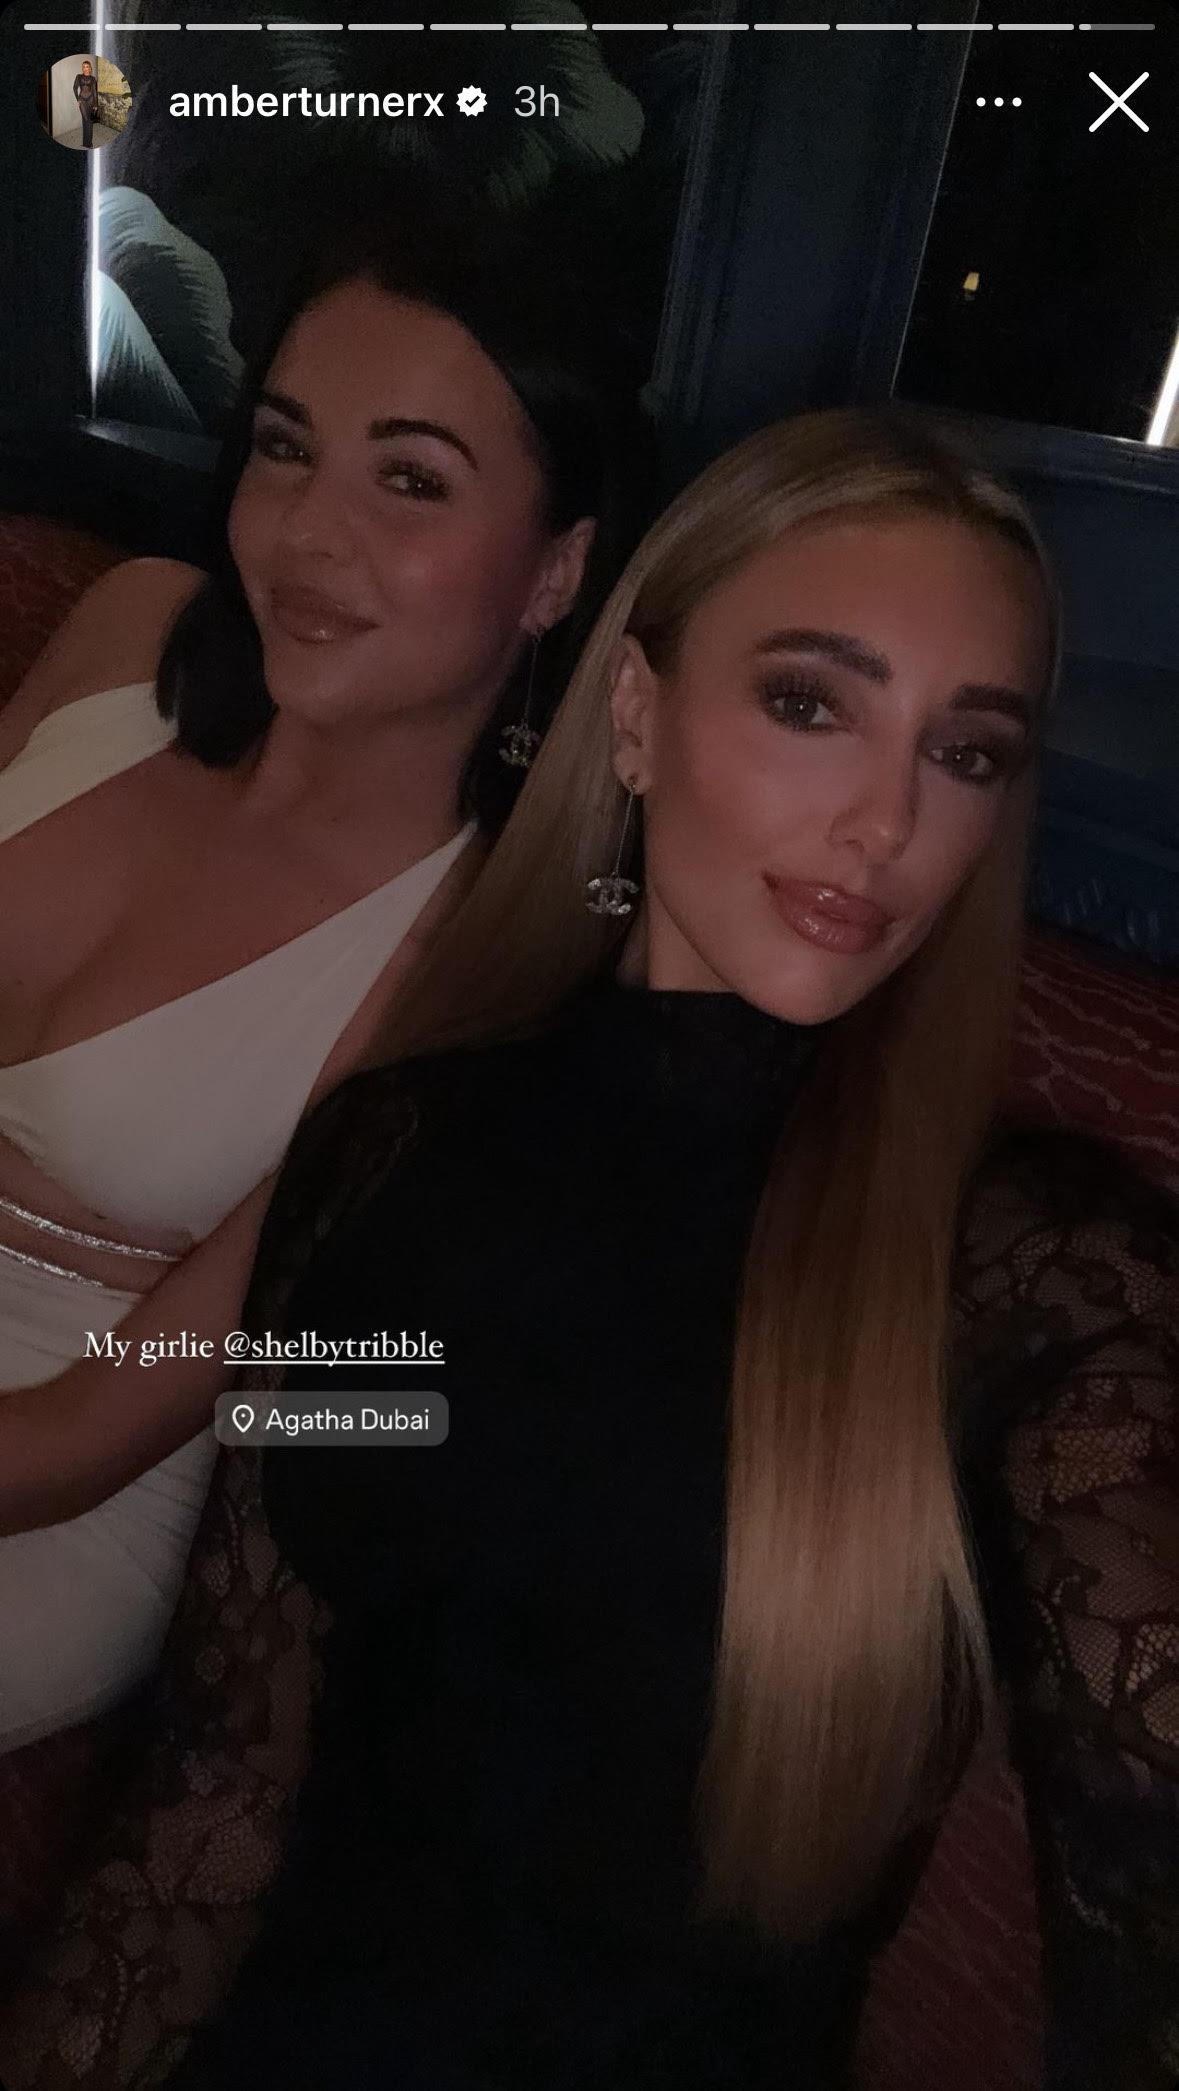 Towie Star Shelby Tribble Reunites with Amber Turner in Dubai